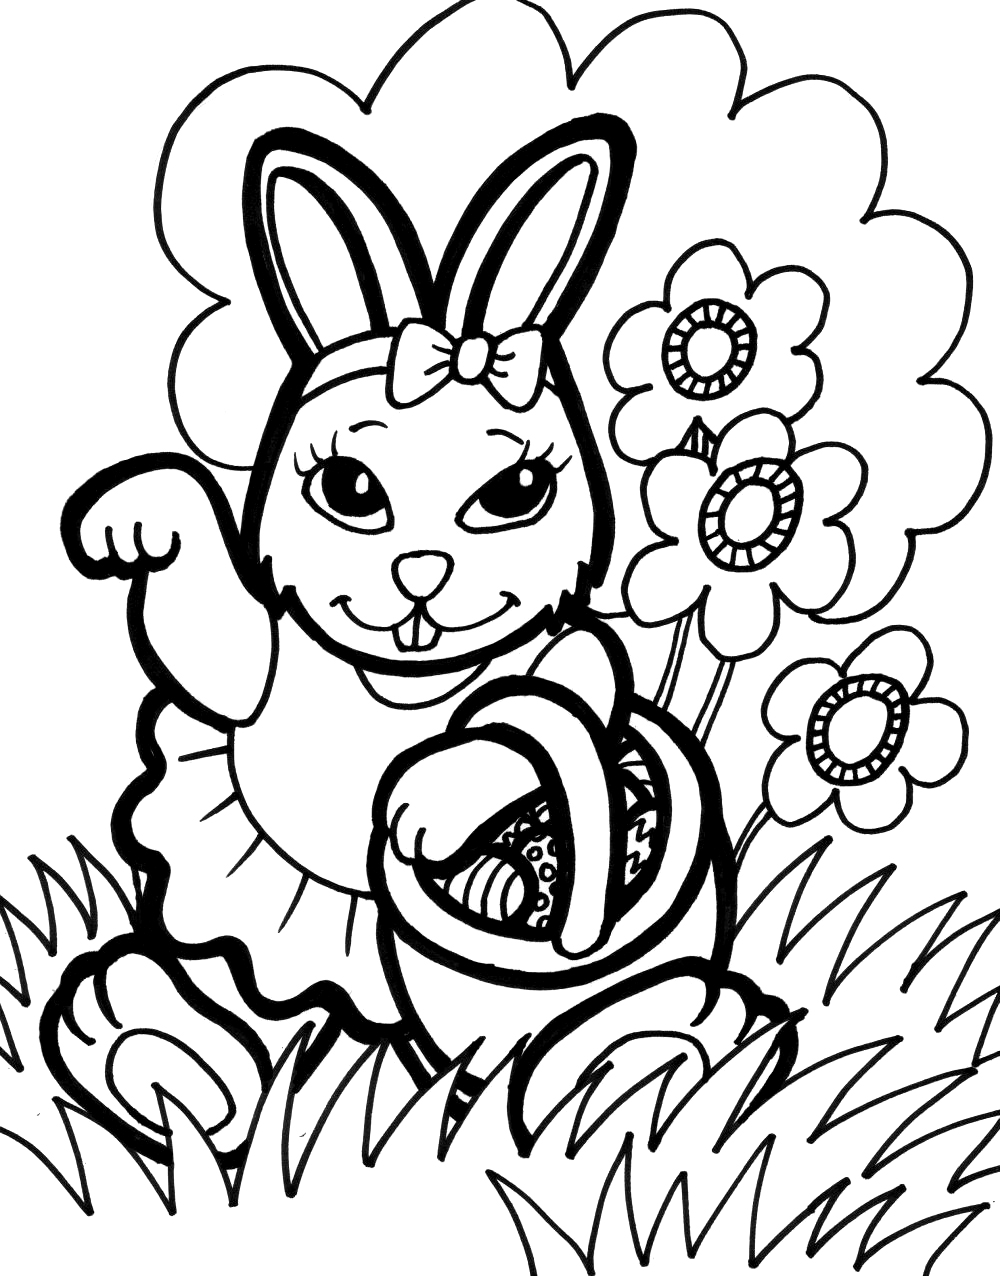 Free Easter Bunny Coloring Page